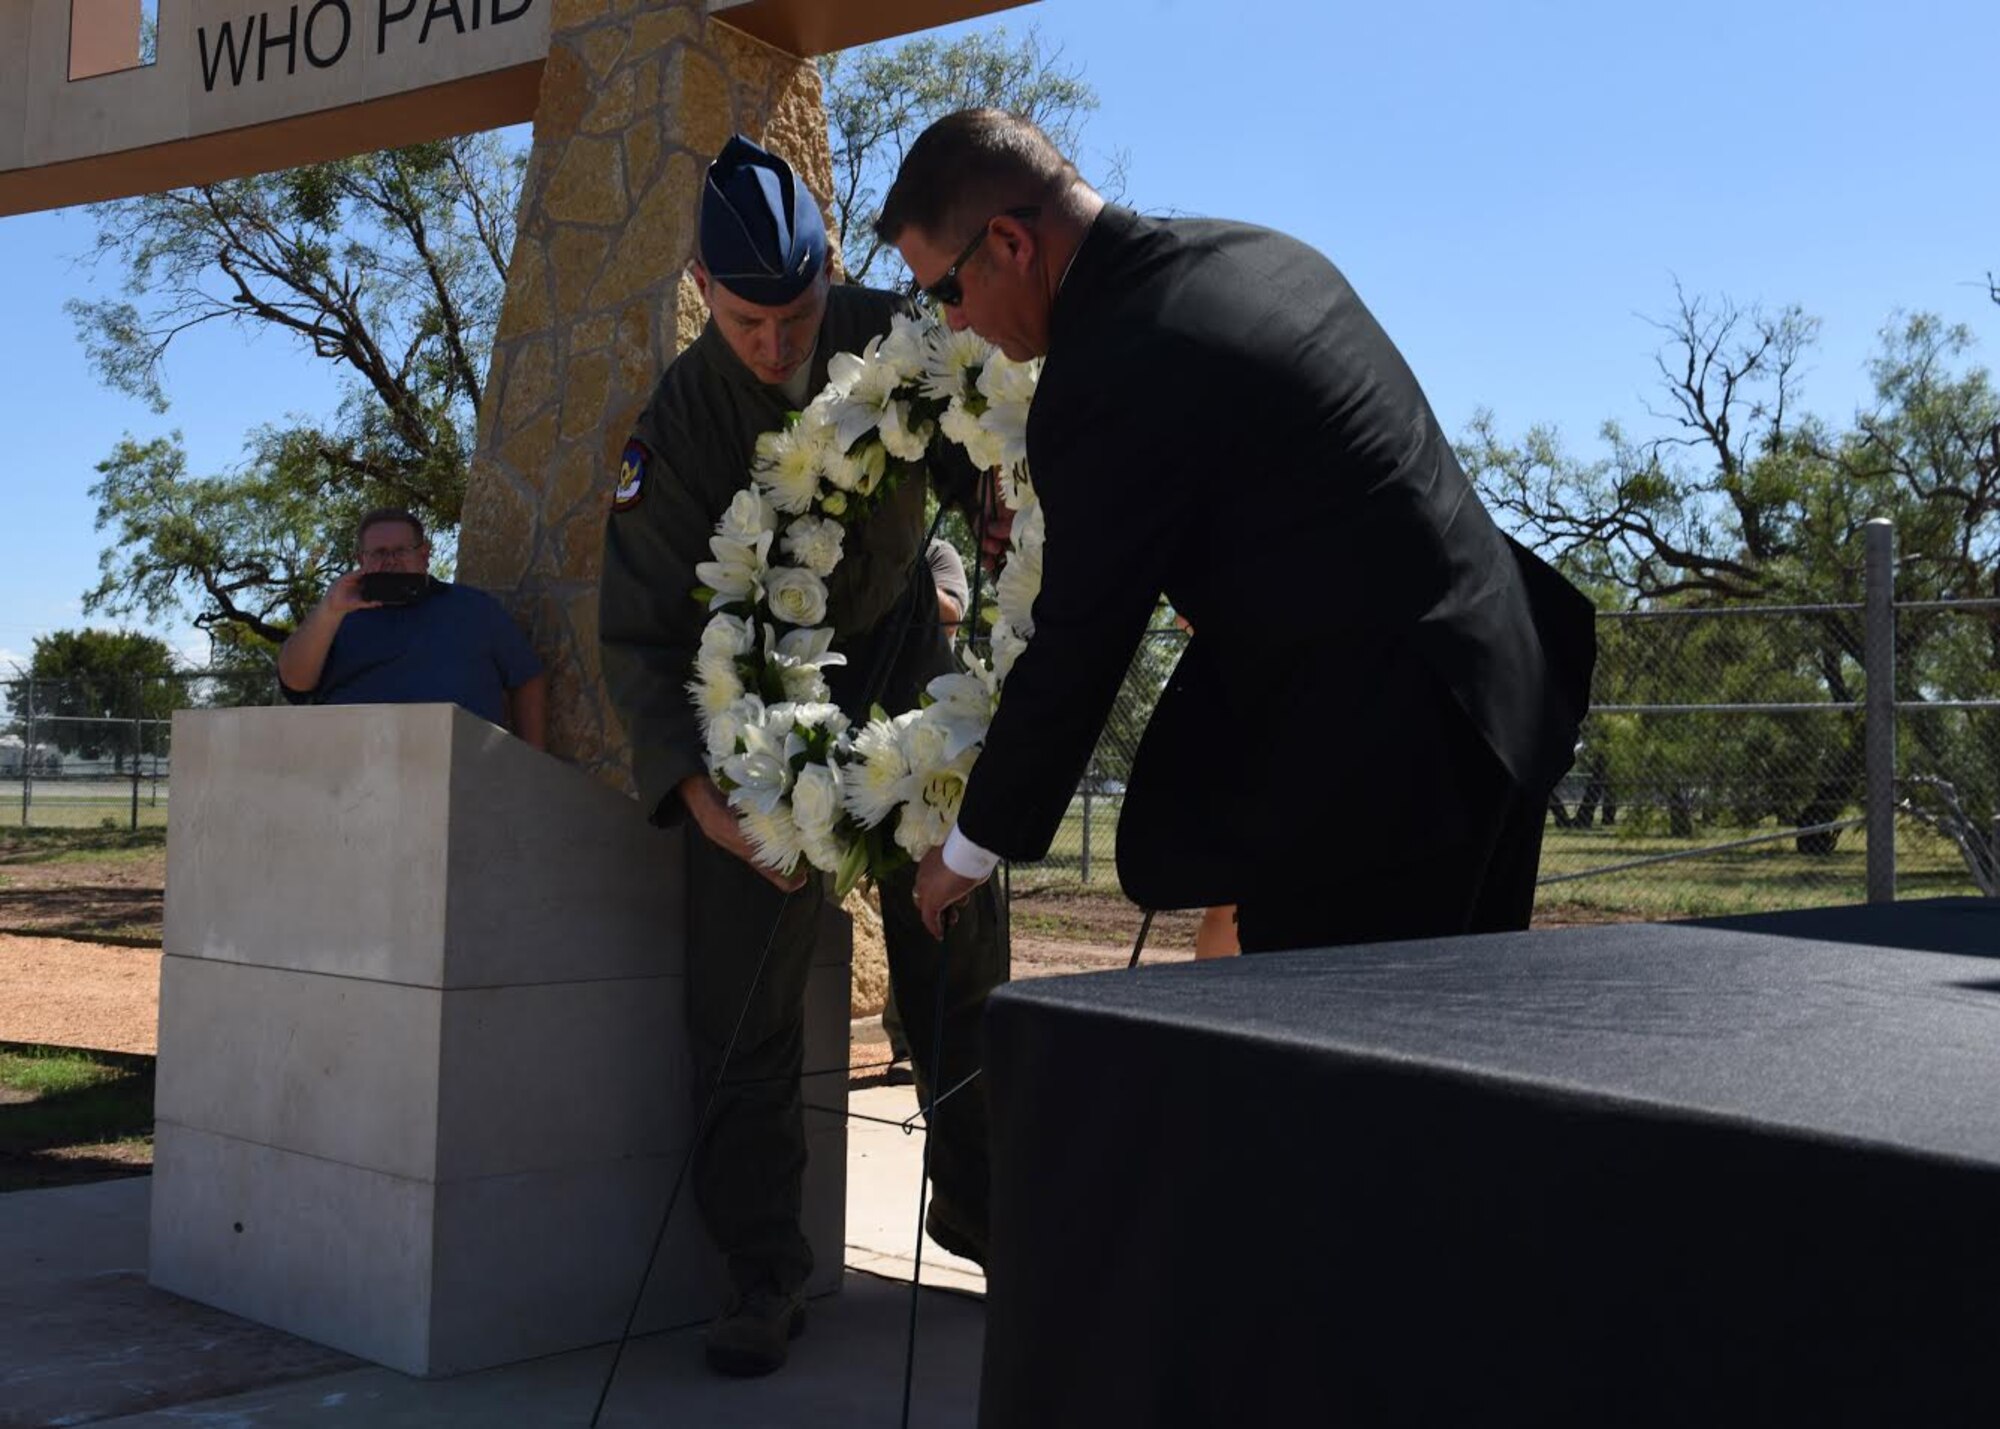 Col. Jeffery Menasco, 317th Airlift Wing commander, middle, and Shawn Martin, 317th Airlift Wing honorary commander, place a wreath next to the TORQE 62 Memorial in Abilene, Texas, Oct. 2, 2019.